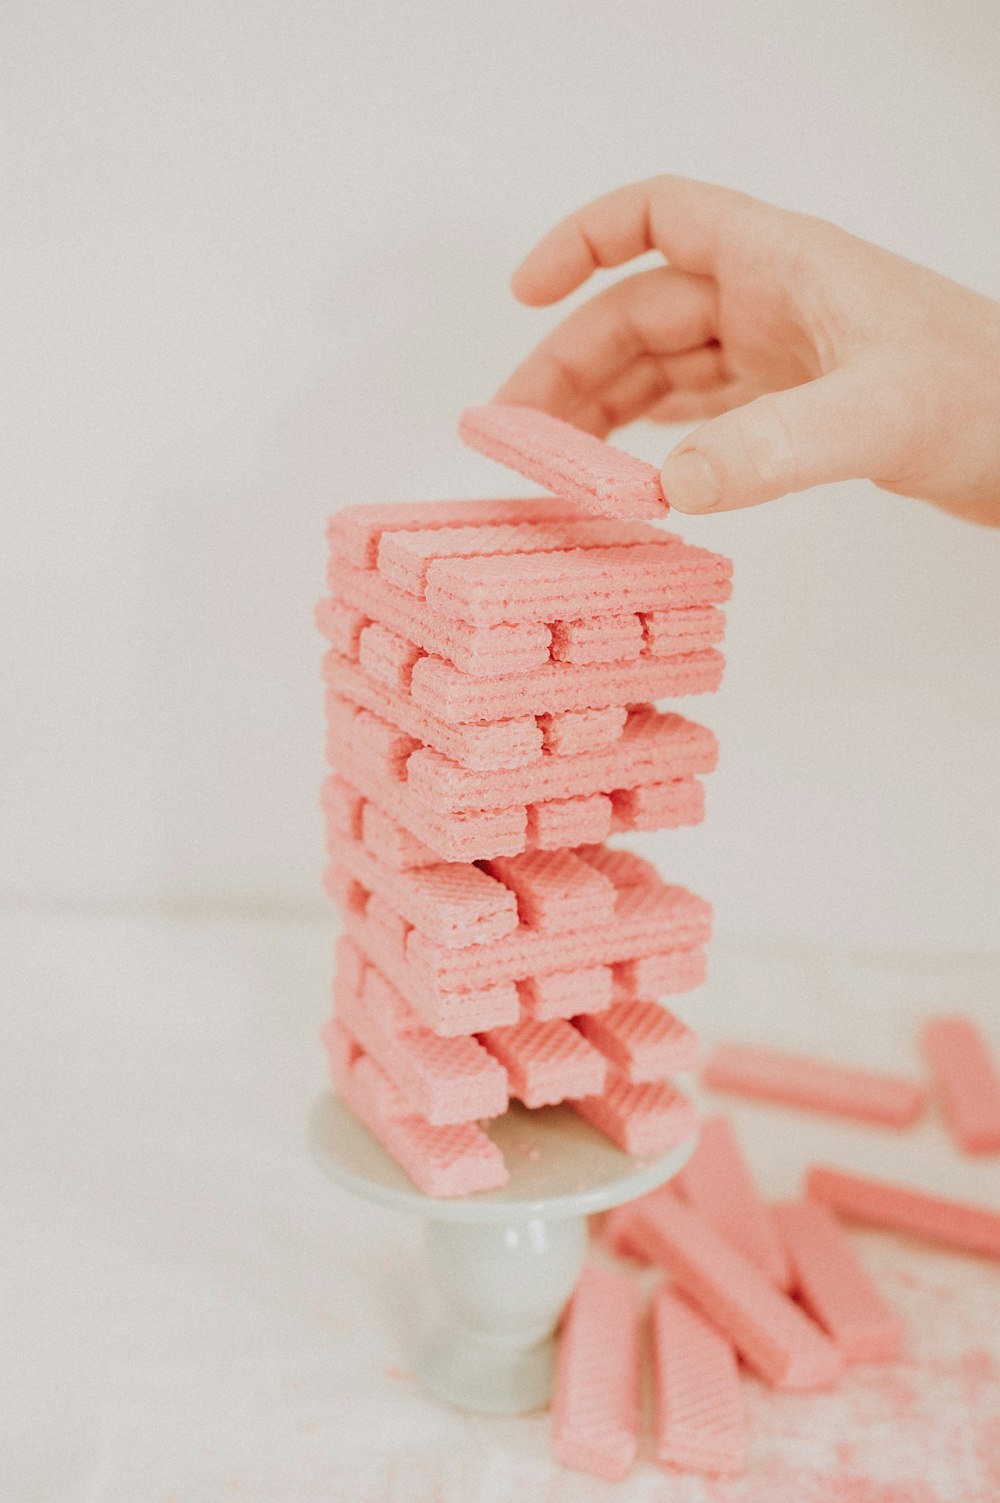 a stack of pink marshmallows being held by a hand